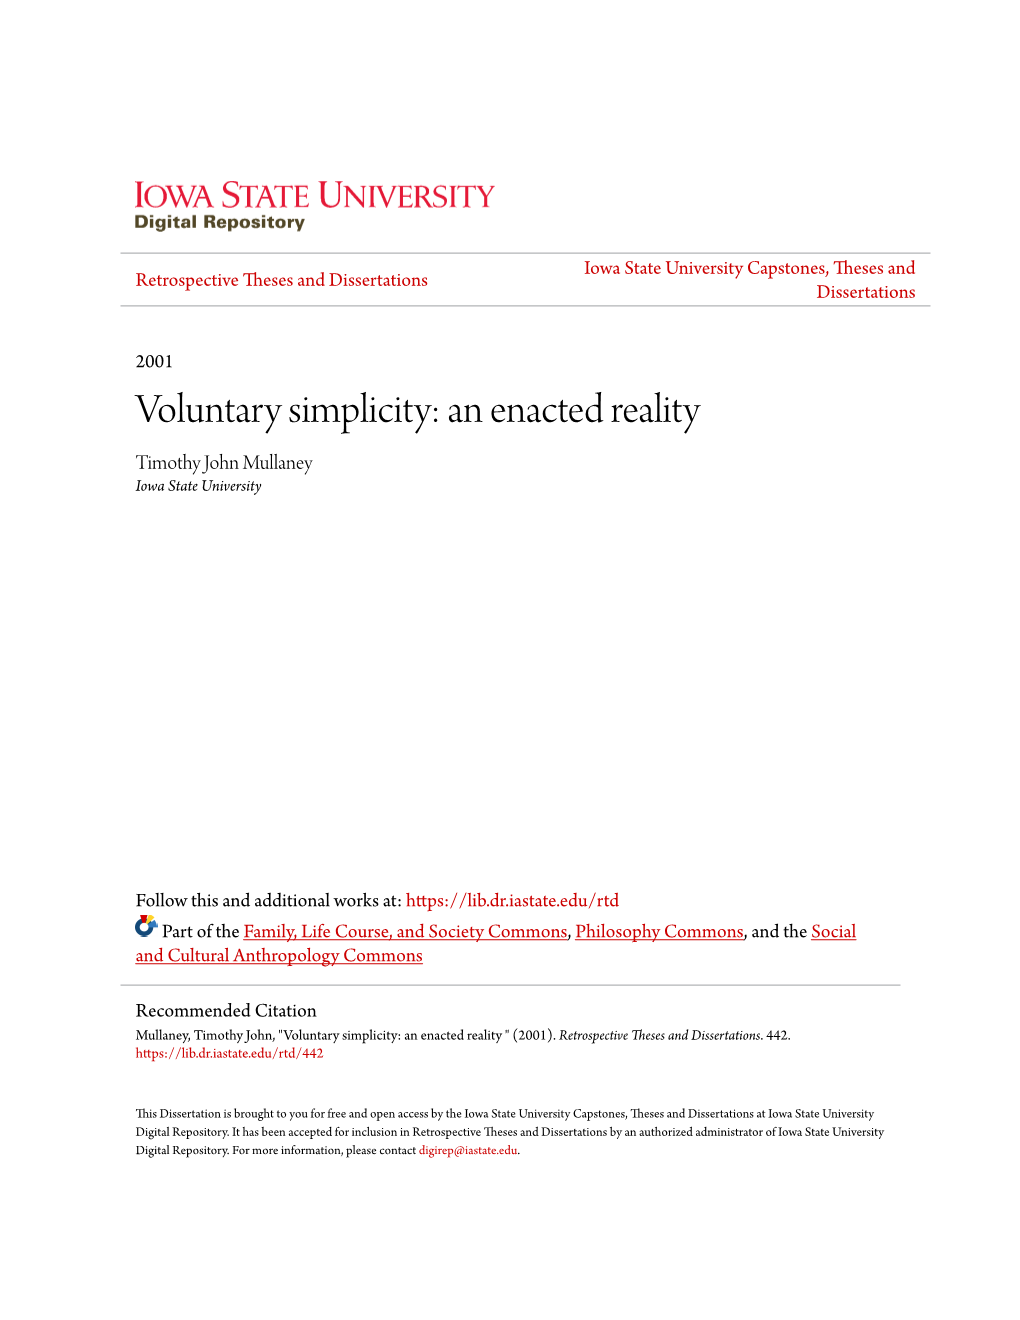 Voluntary Simplicity: an Enacted Reality Timothy John Mullaney Iowa State University